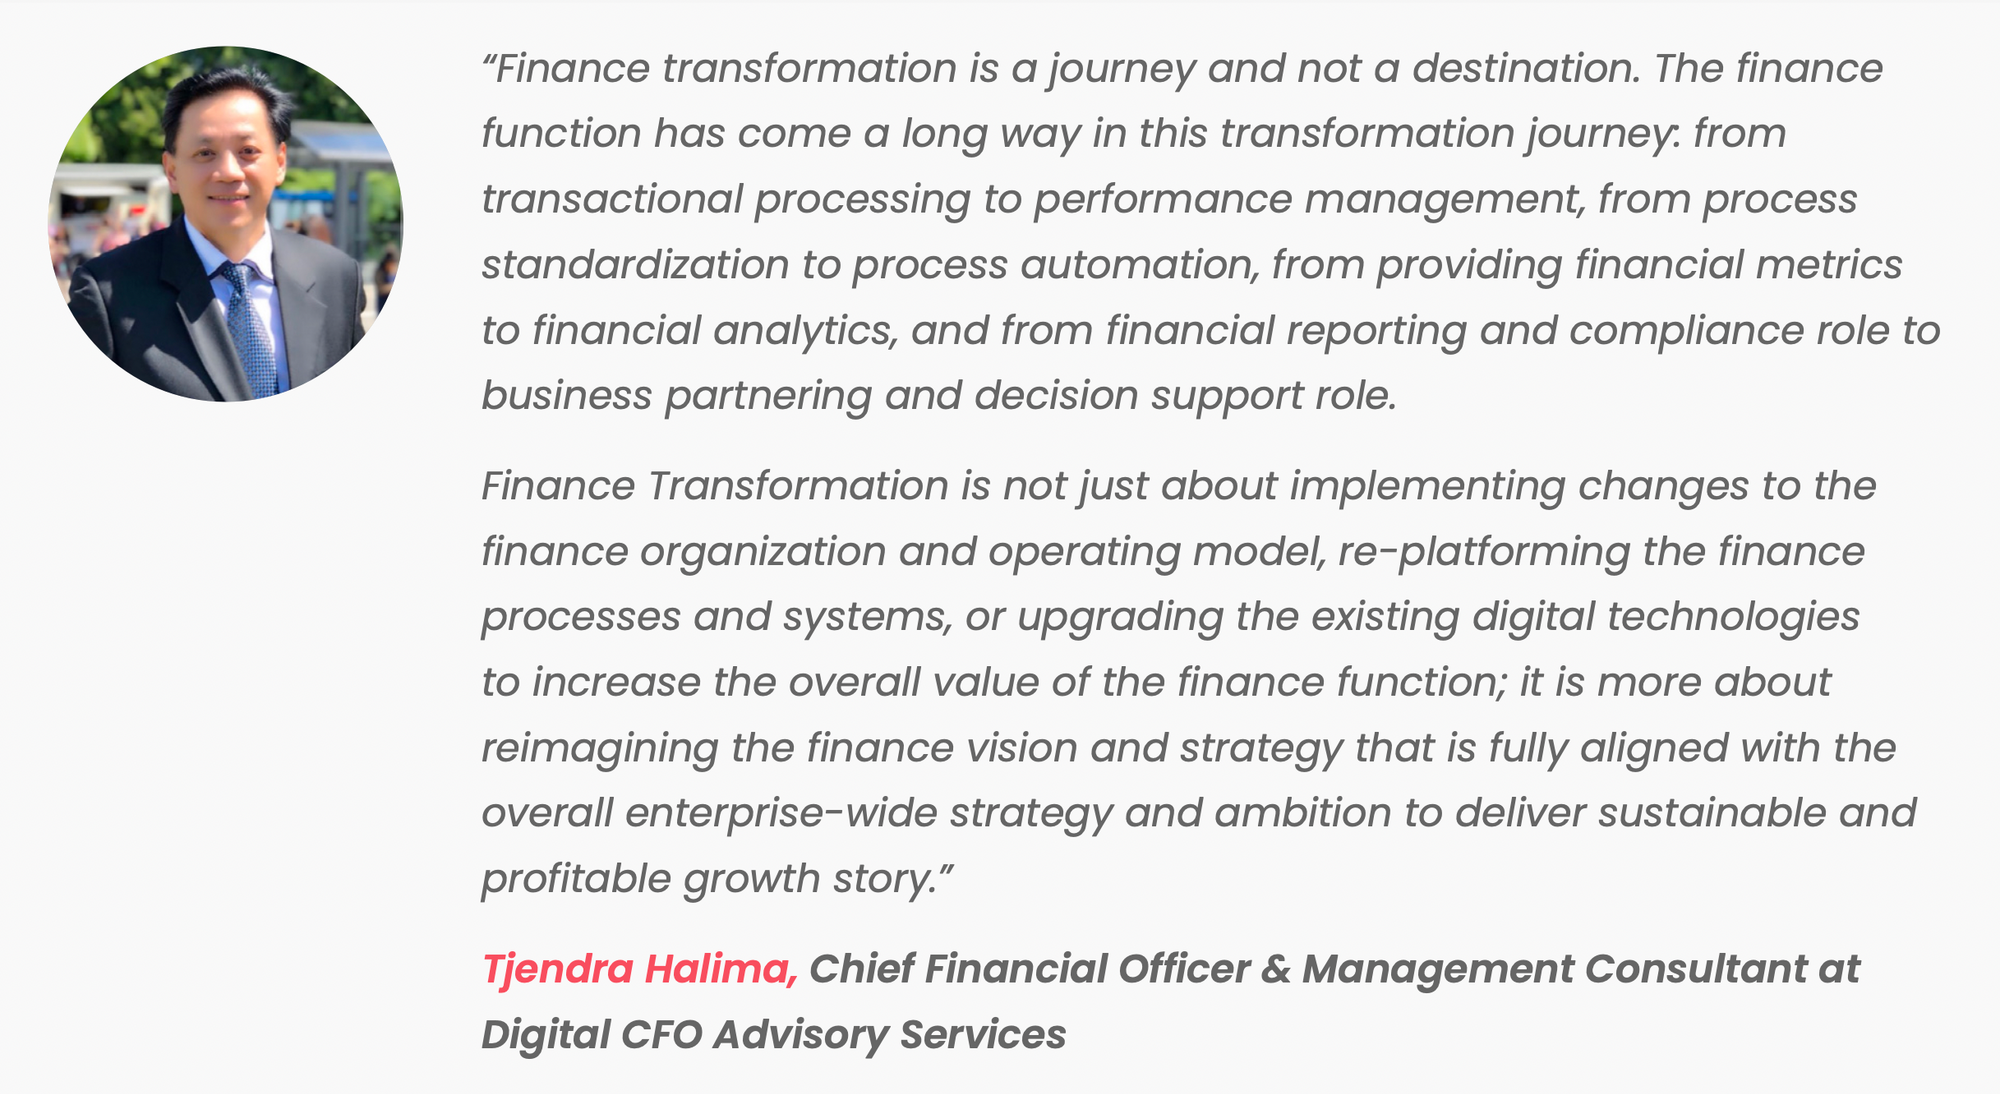 What is finance transformation - Tjendra Halima quote